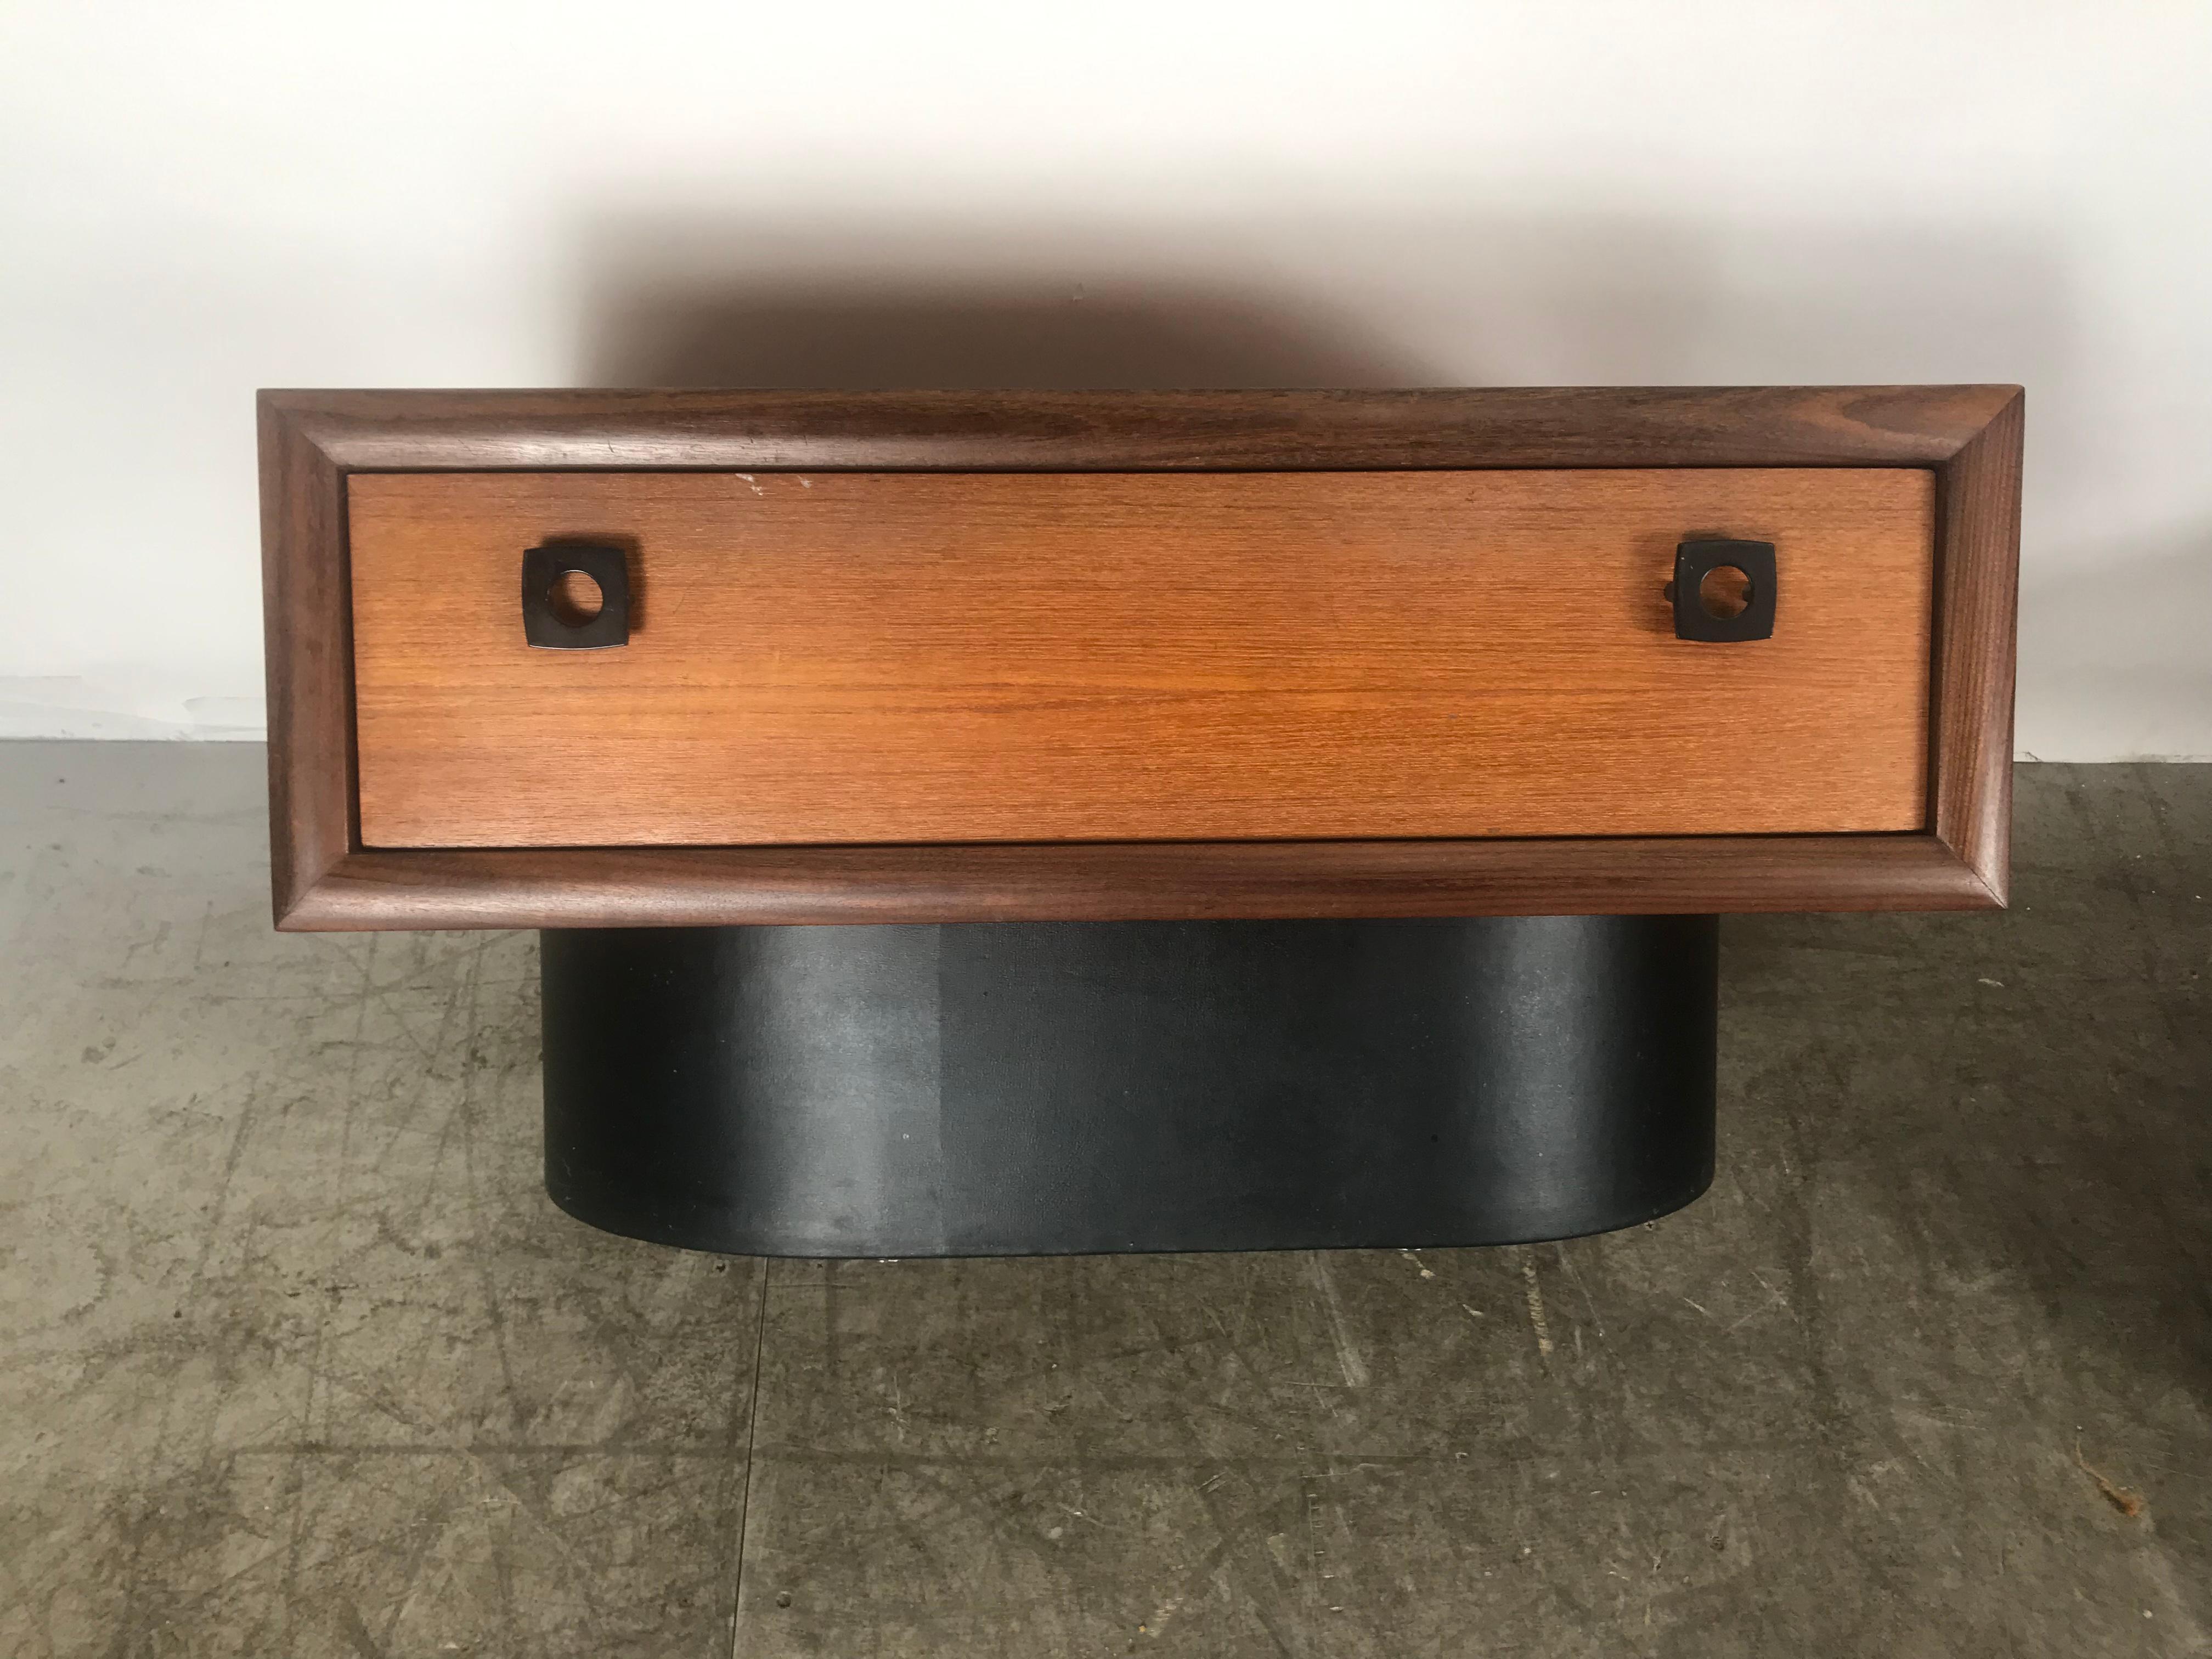 Classic 1970s teak and leather wrapped stands / end tables by RS Assocciates. Montreal. Stunning design,, Low profile,, oval leather wrapped base, metal pulls reminiscent of Ralph Lauren's designs. Each stand has one generous size drawer.